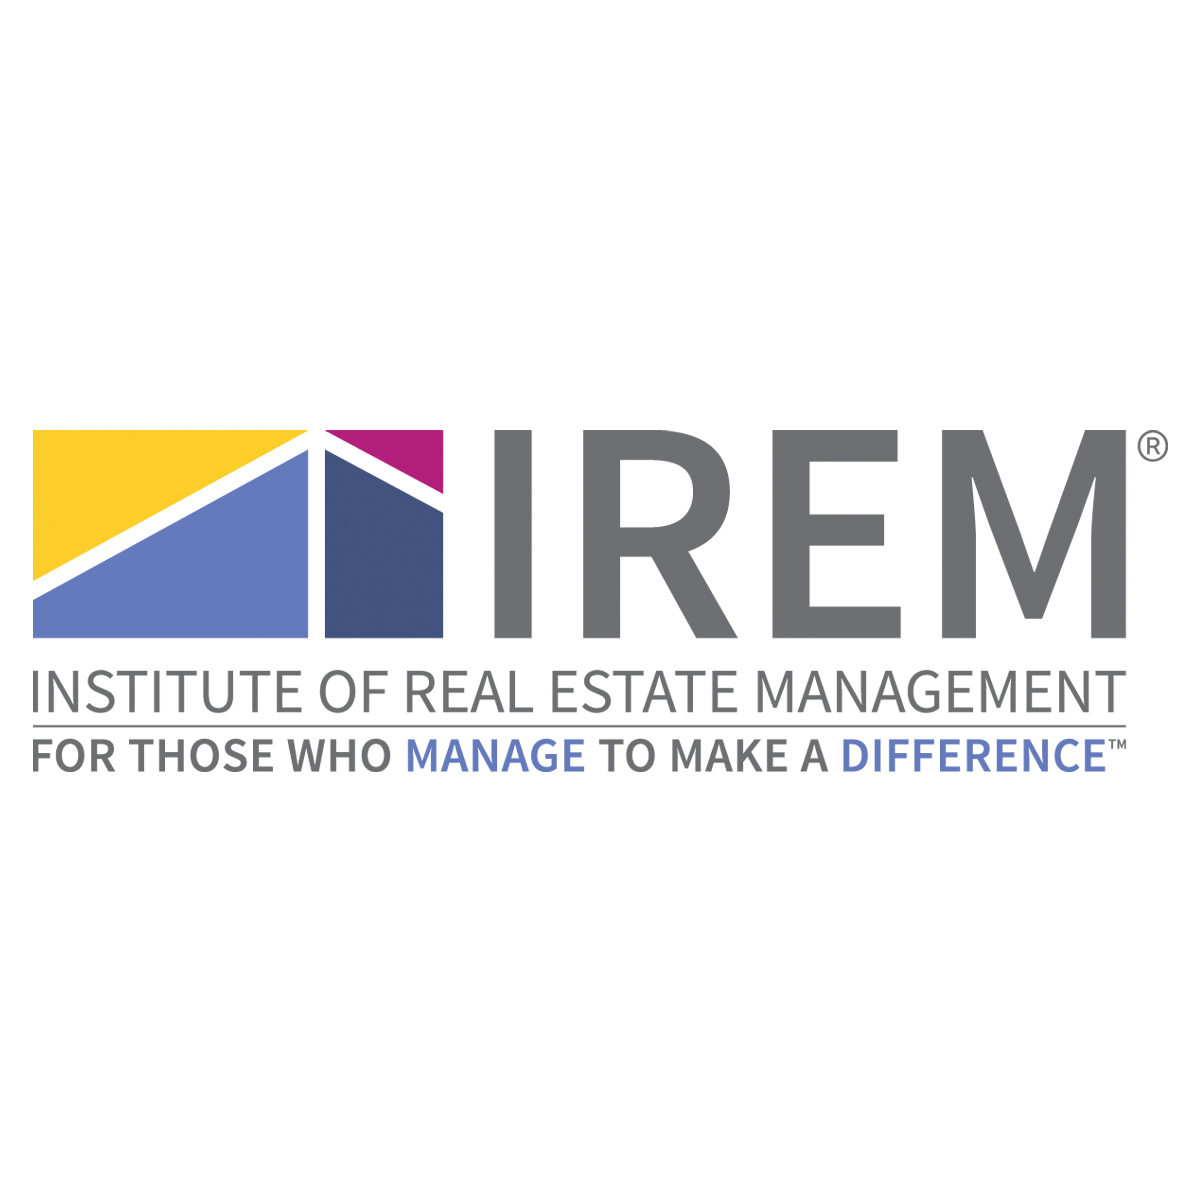 Institute of Real Estate Management® (IREM®) about